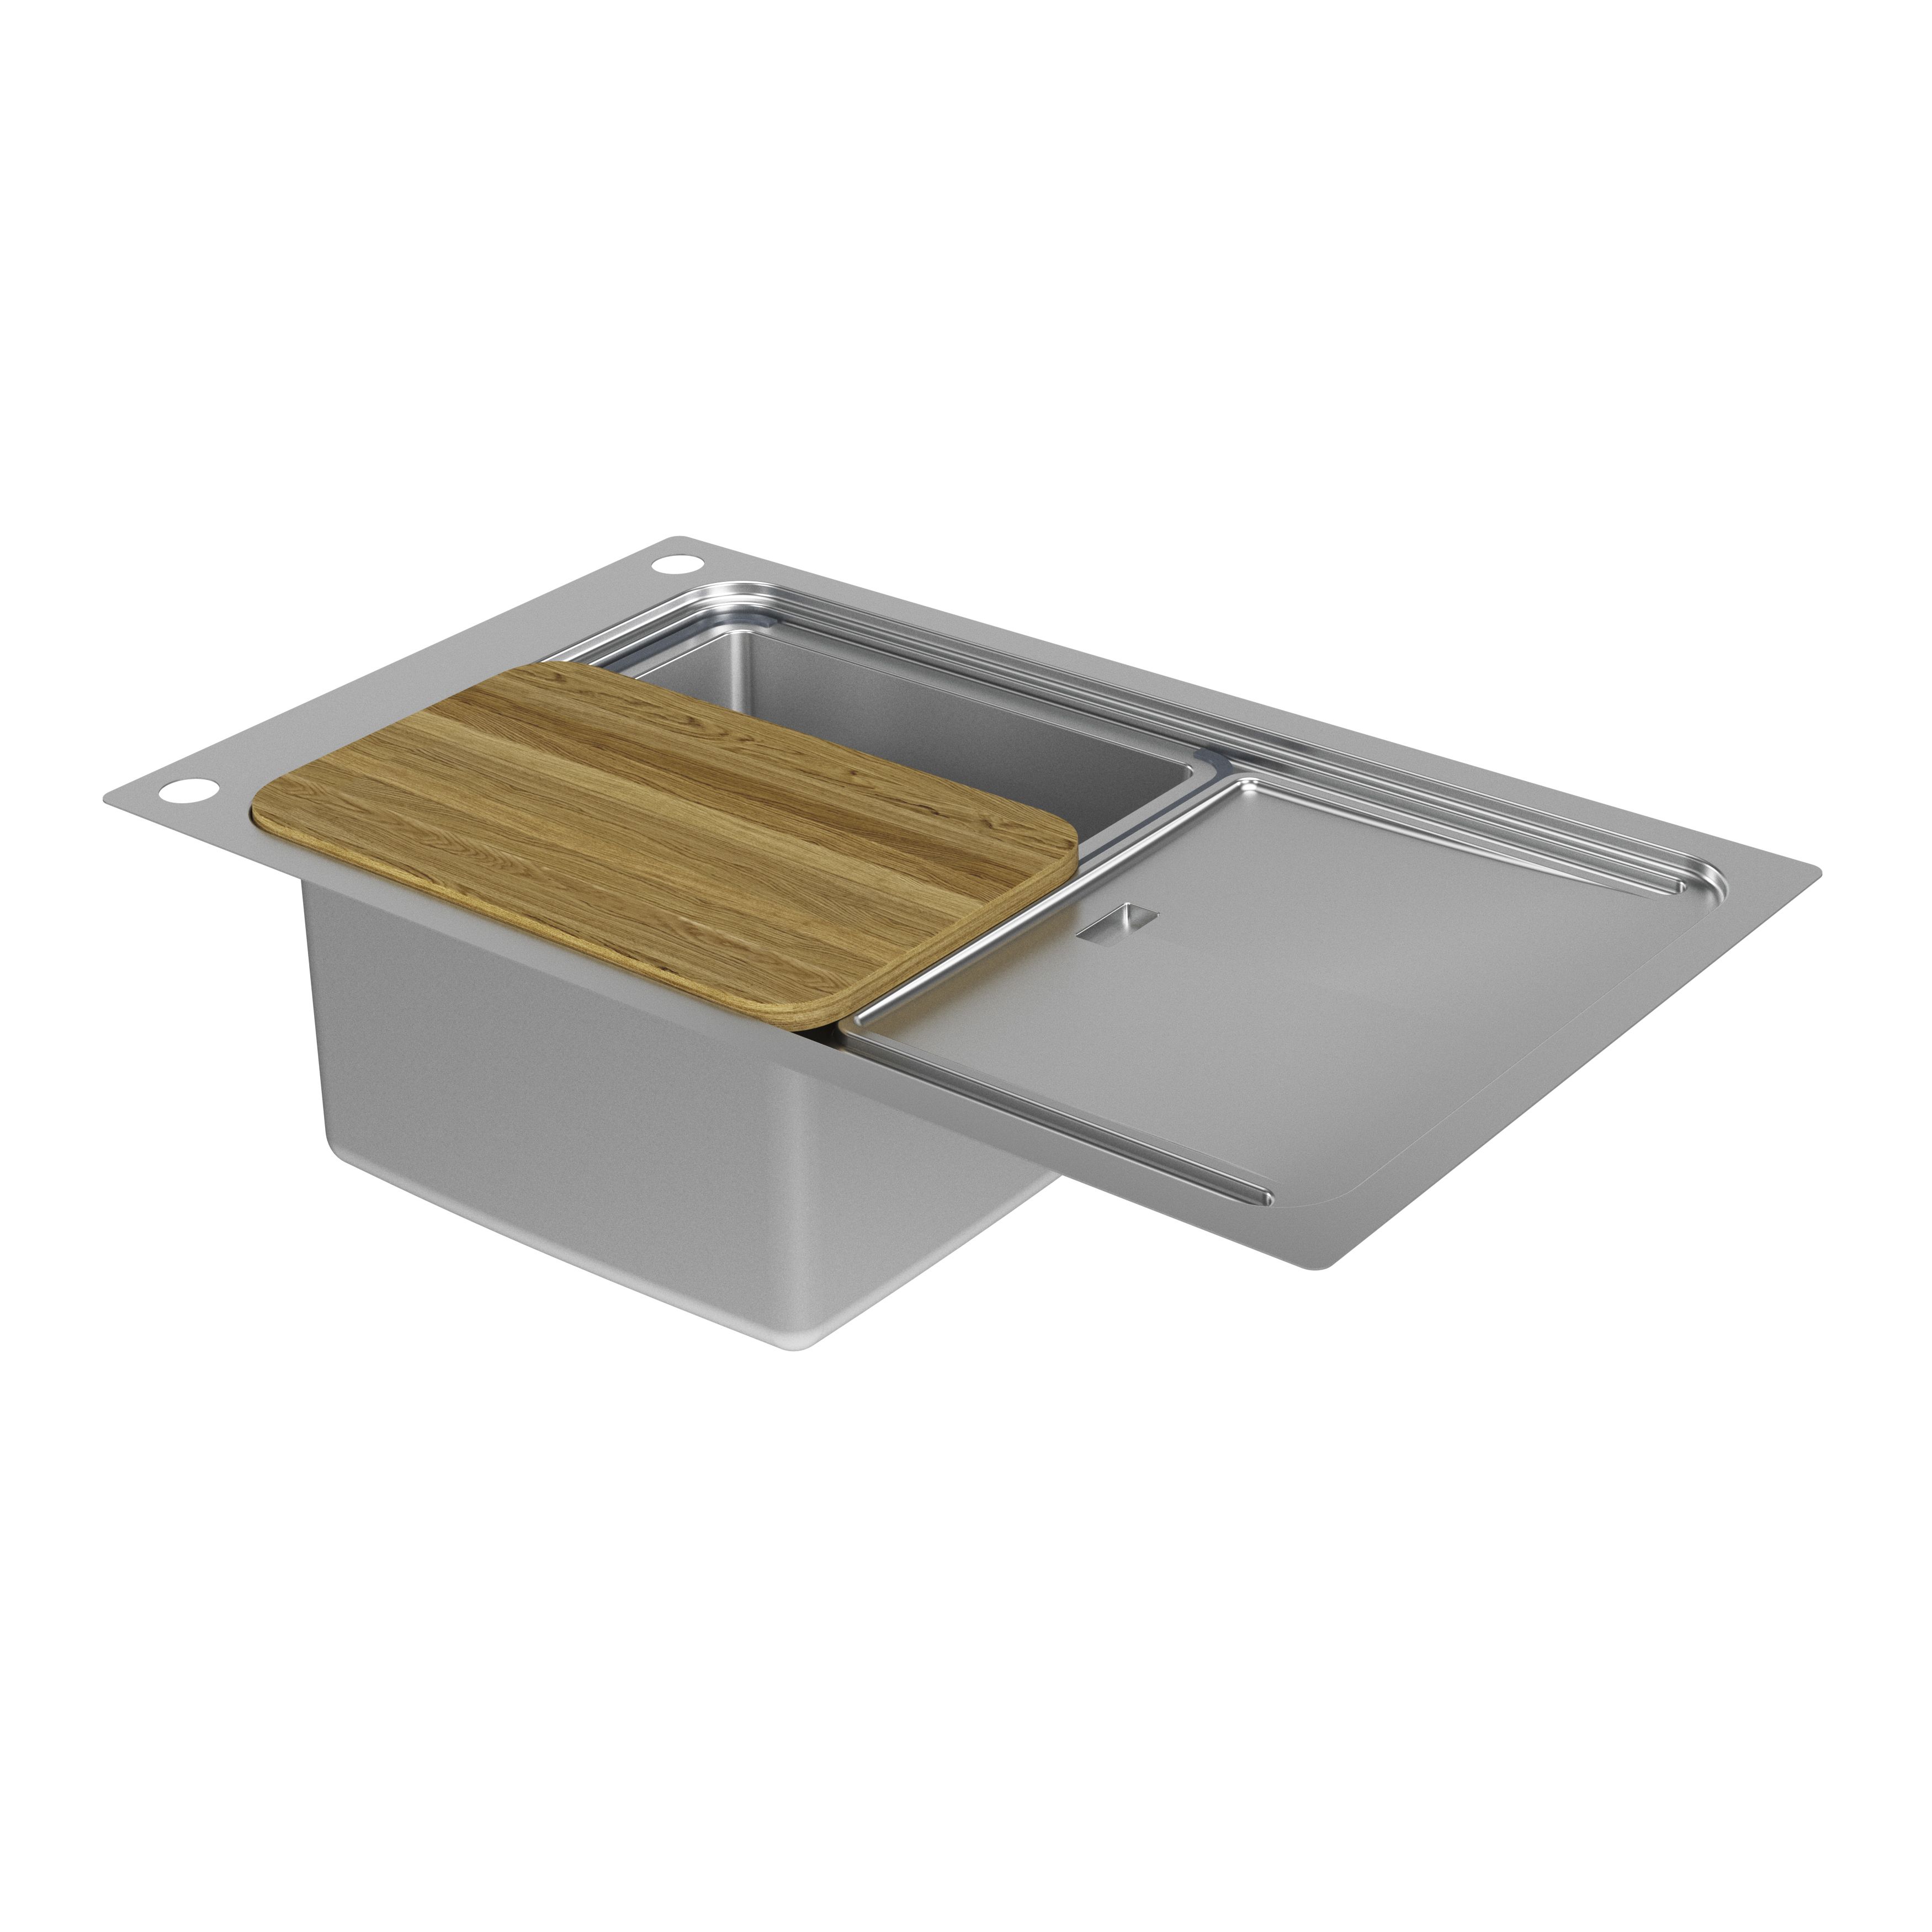 GoodHome Romesco Linea Brushed Stainless steel 1 Bowl Kitchen sink 510mm x 880mm